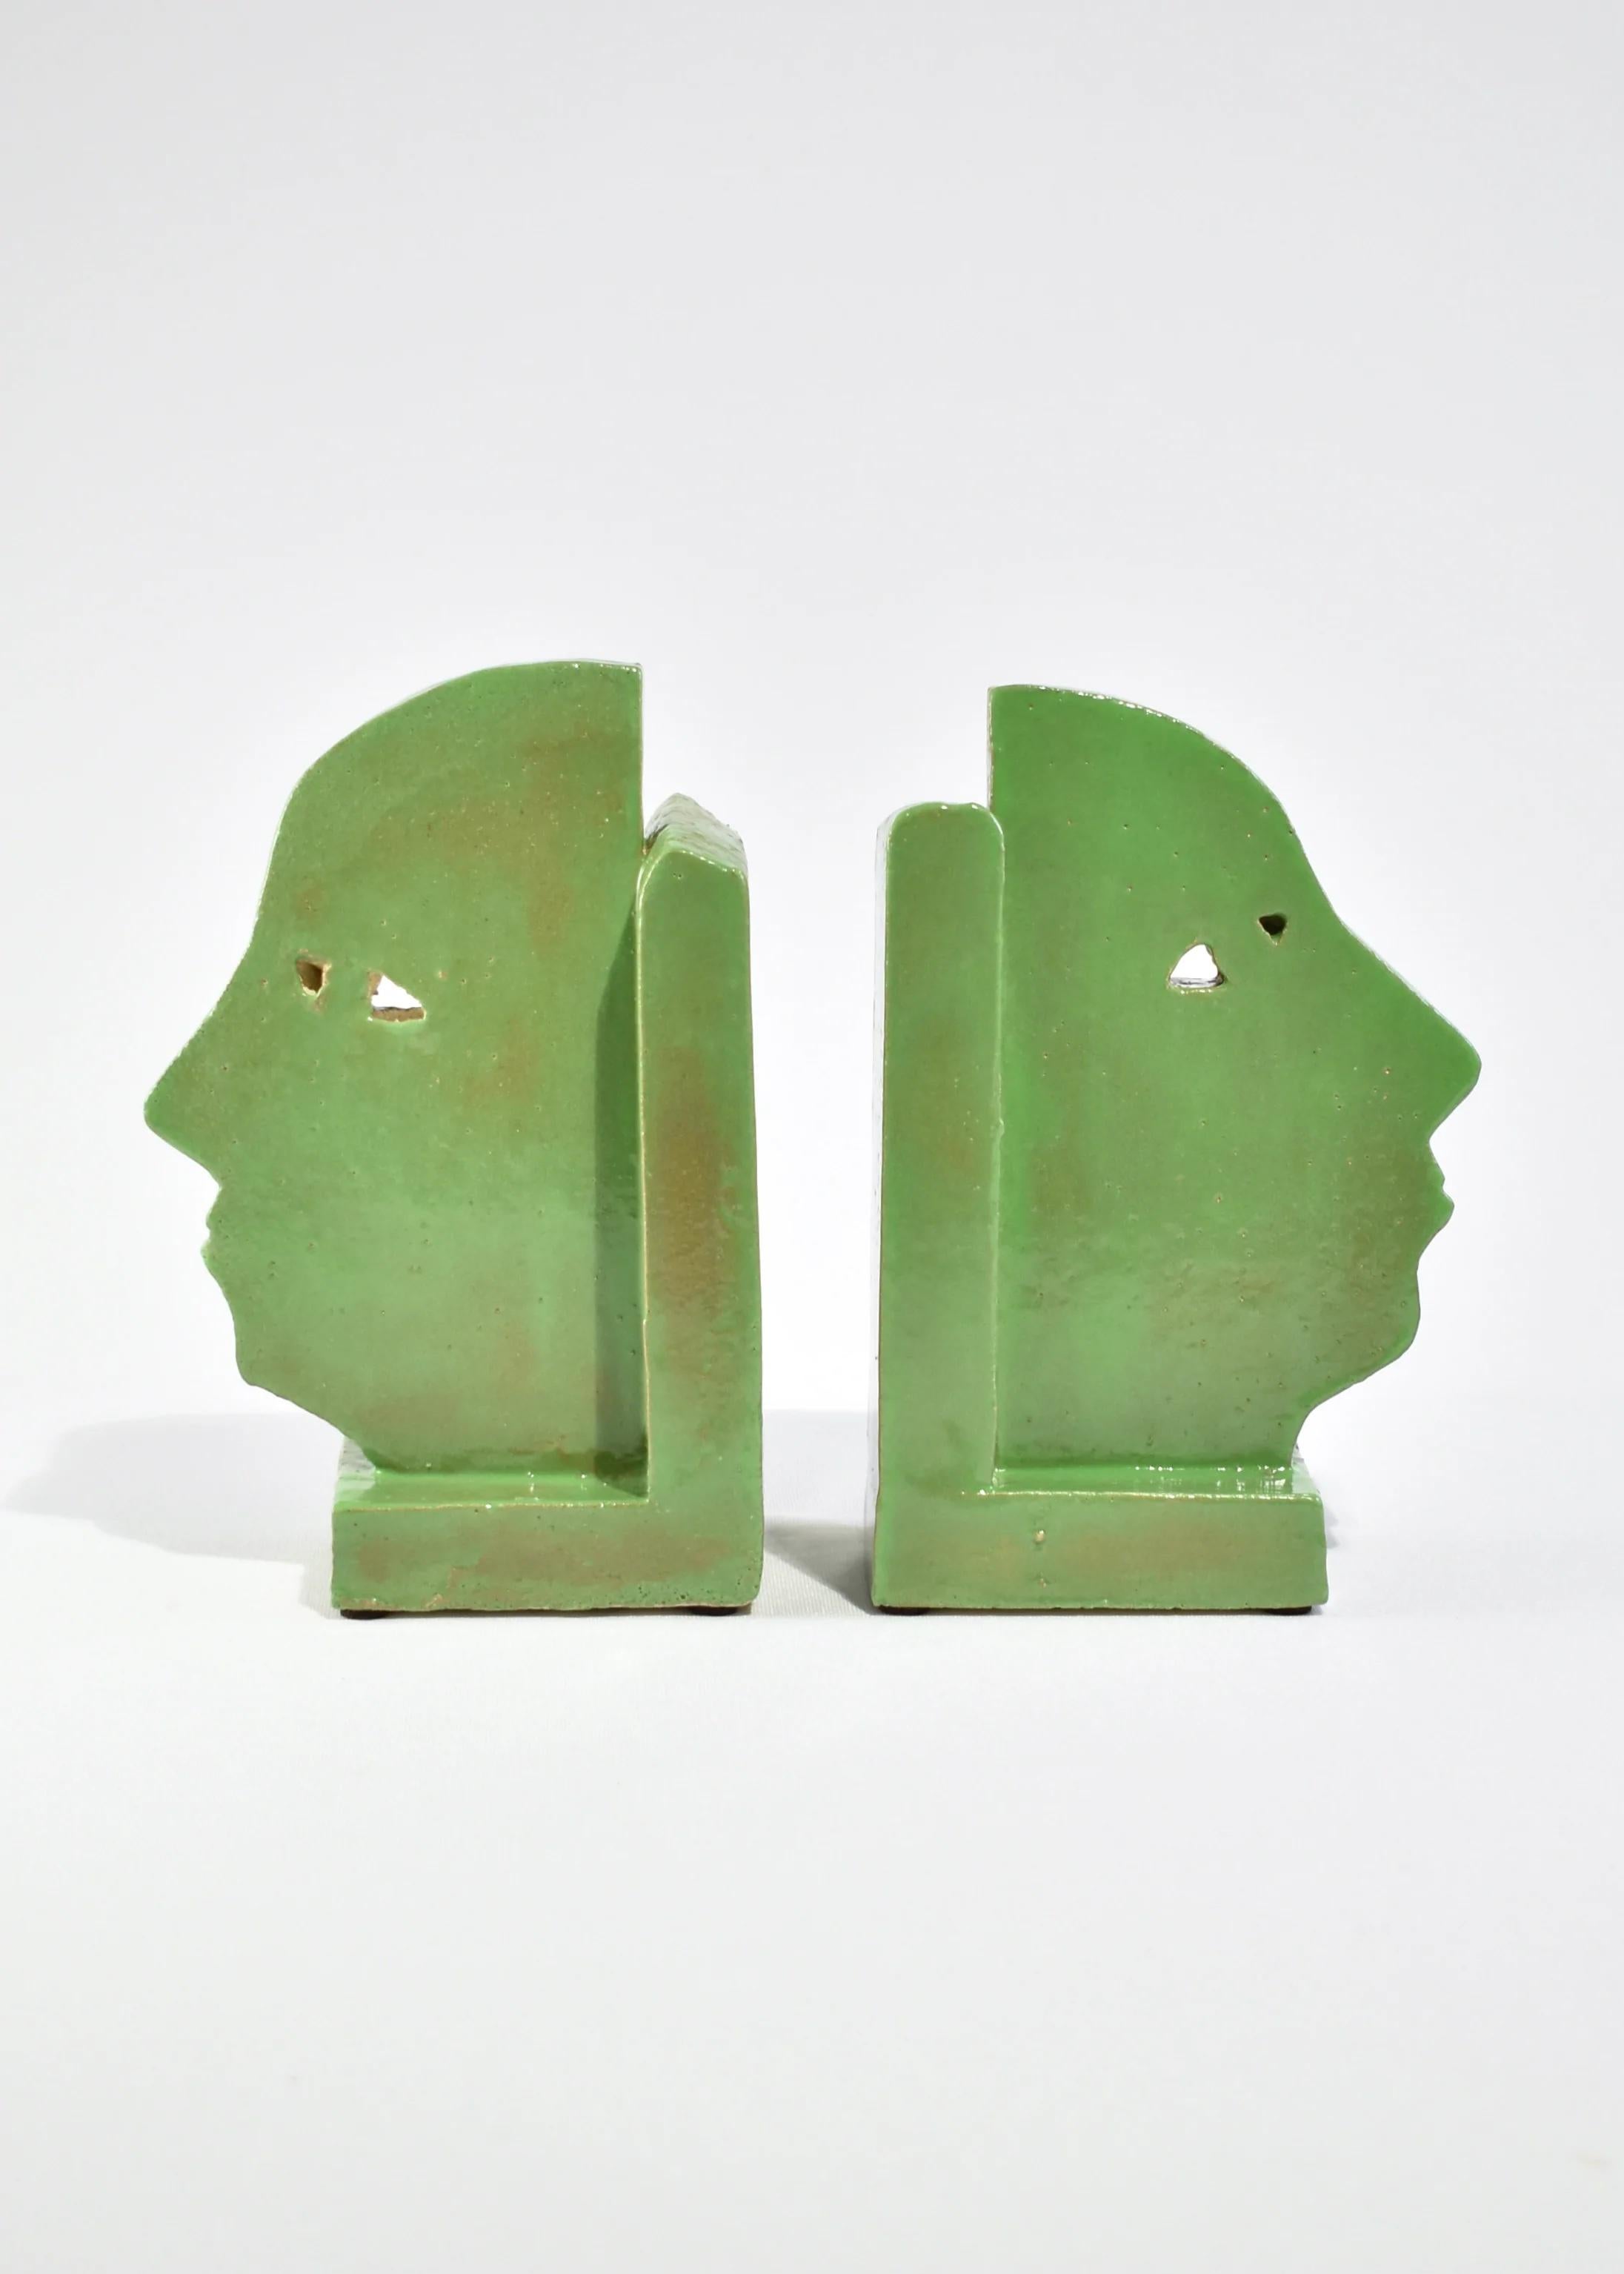 Handmade slab-built bookends with a face profile design in green, set of two. By Shane Gabier, made in NYC.

Please note that this item is handmade and therefore unique; slight variations in color and shape are to be expected.